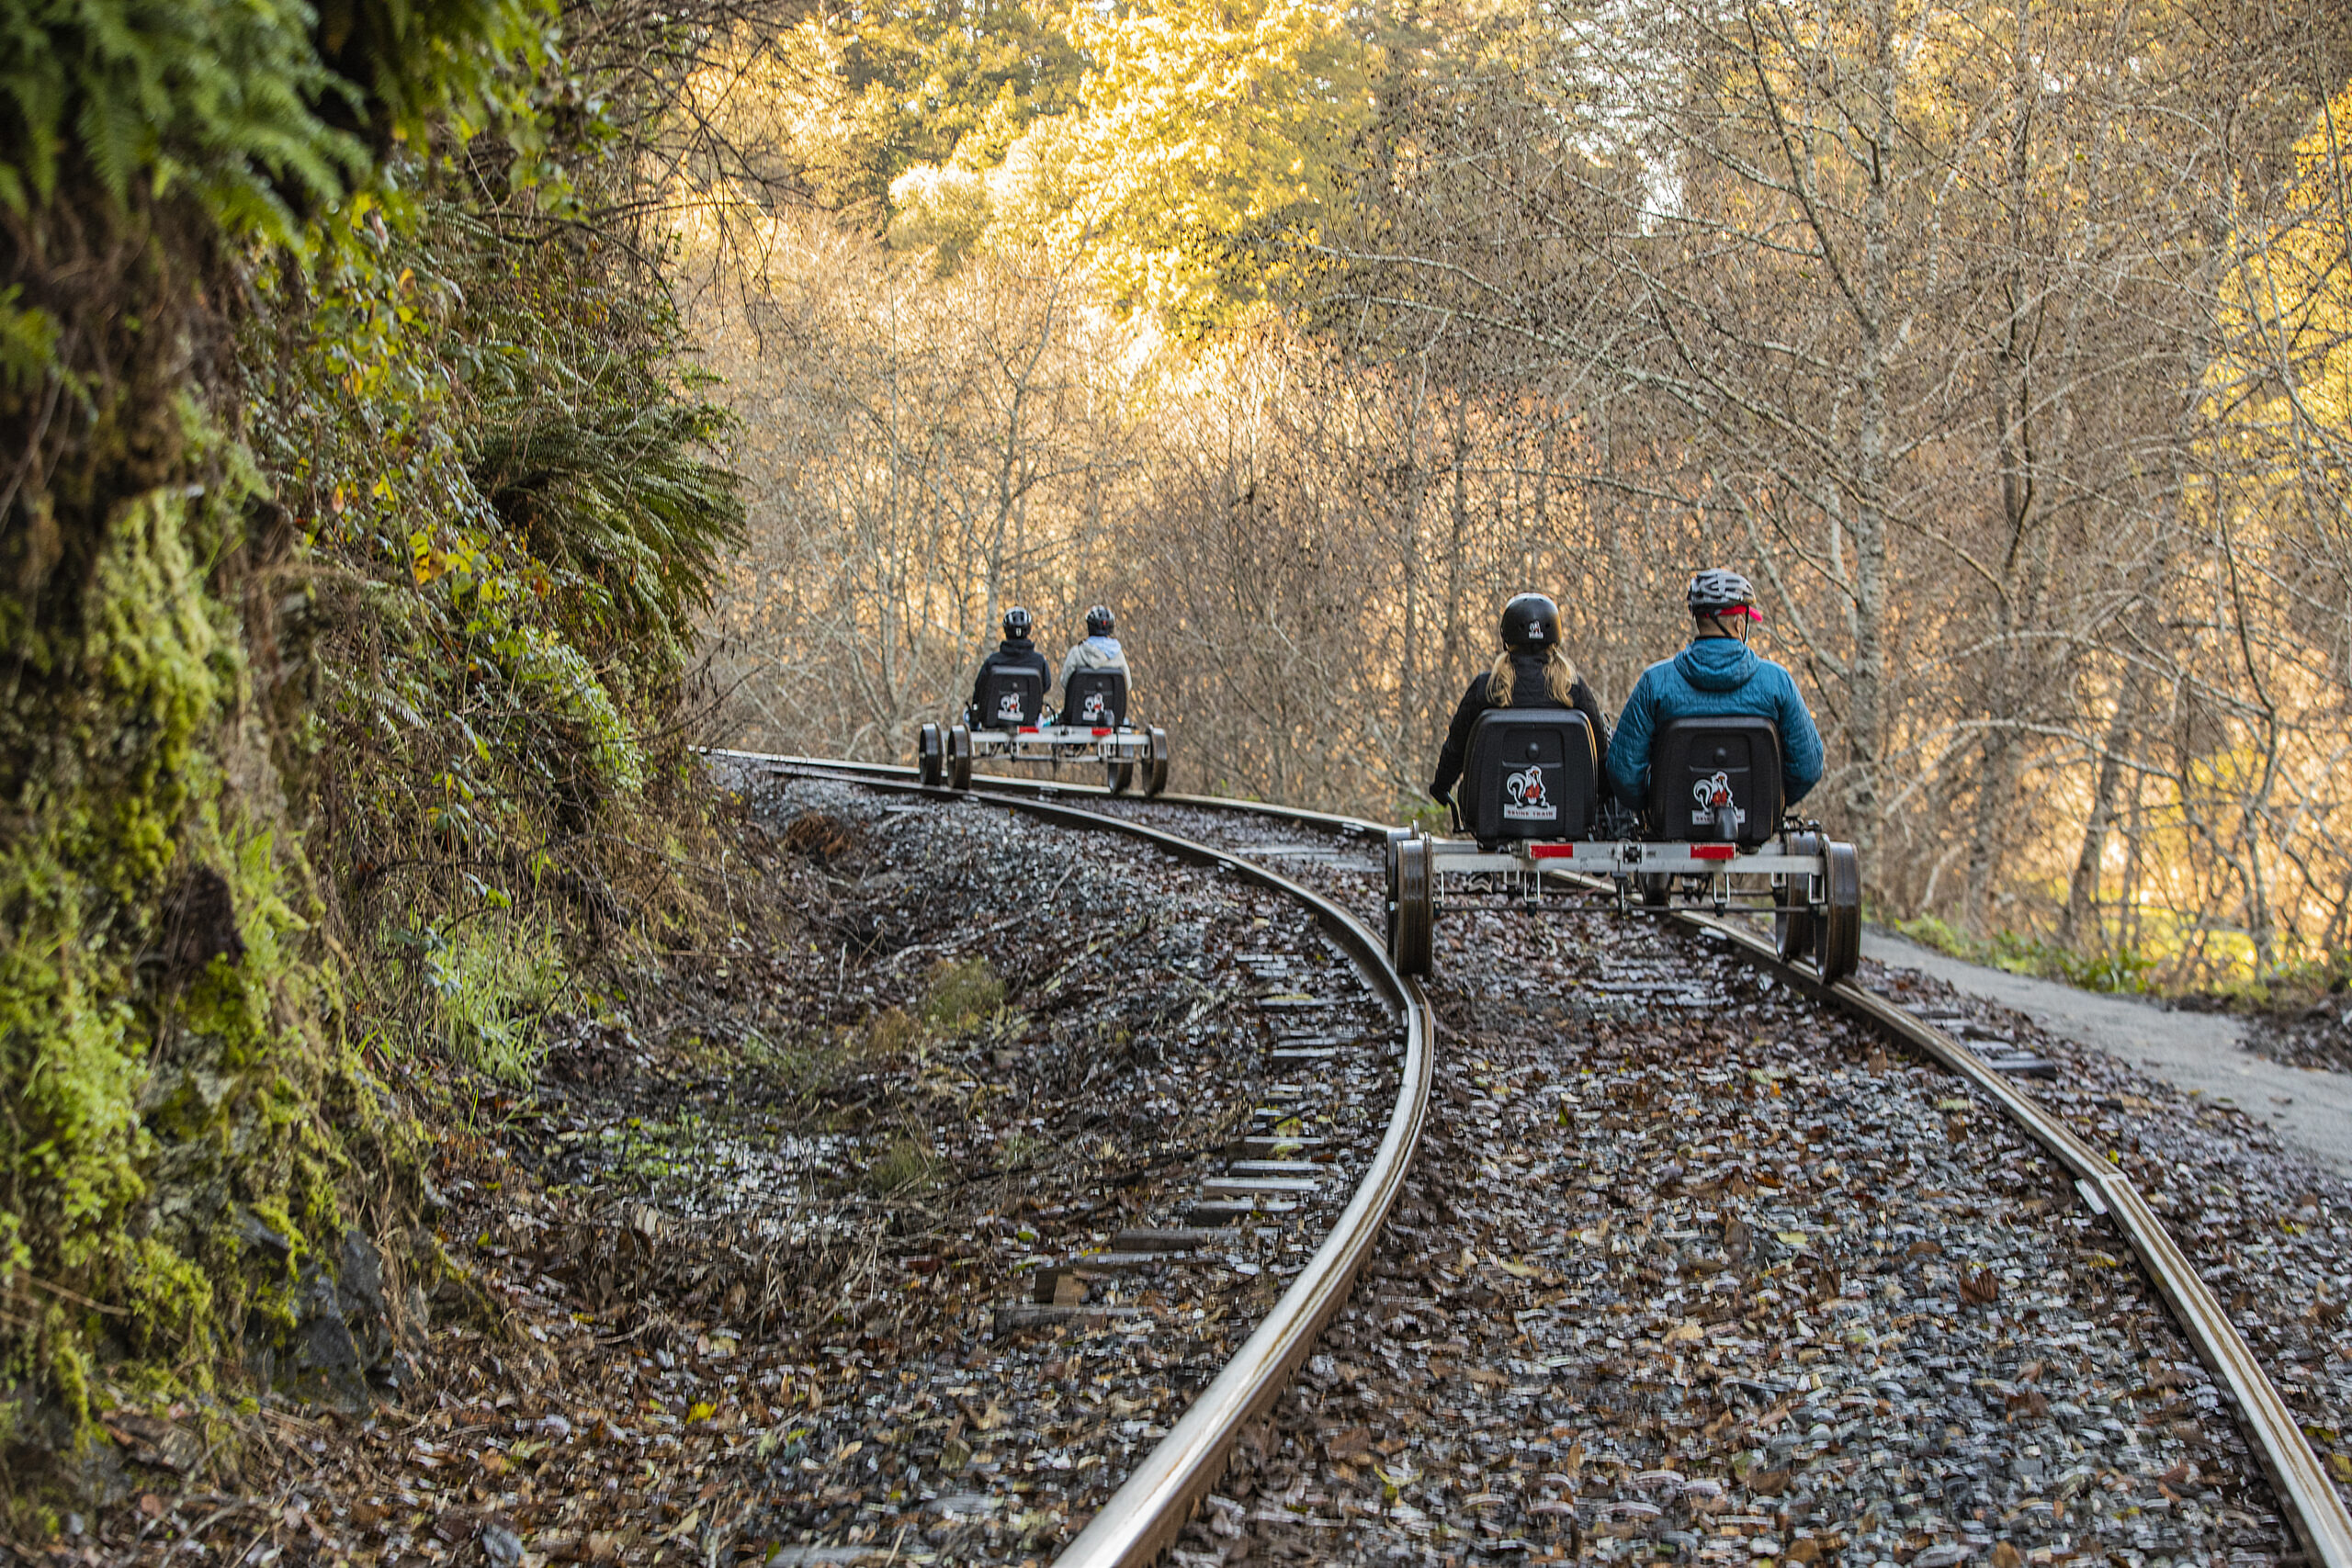 Creek on their way back to the Skunk Train Depot in Ft. Bragg on Wednesday January 19, 2022. The Skunk Train opened their seasonal tours this last weekend and continue through the season.